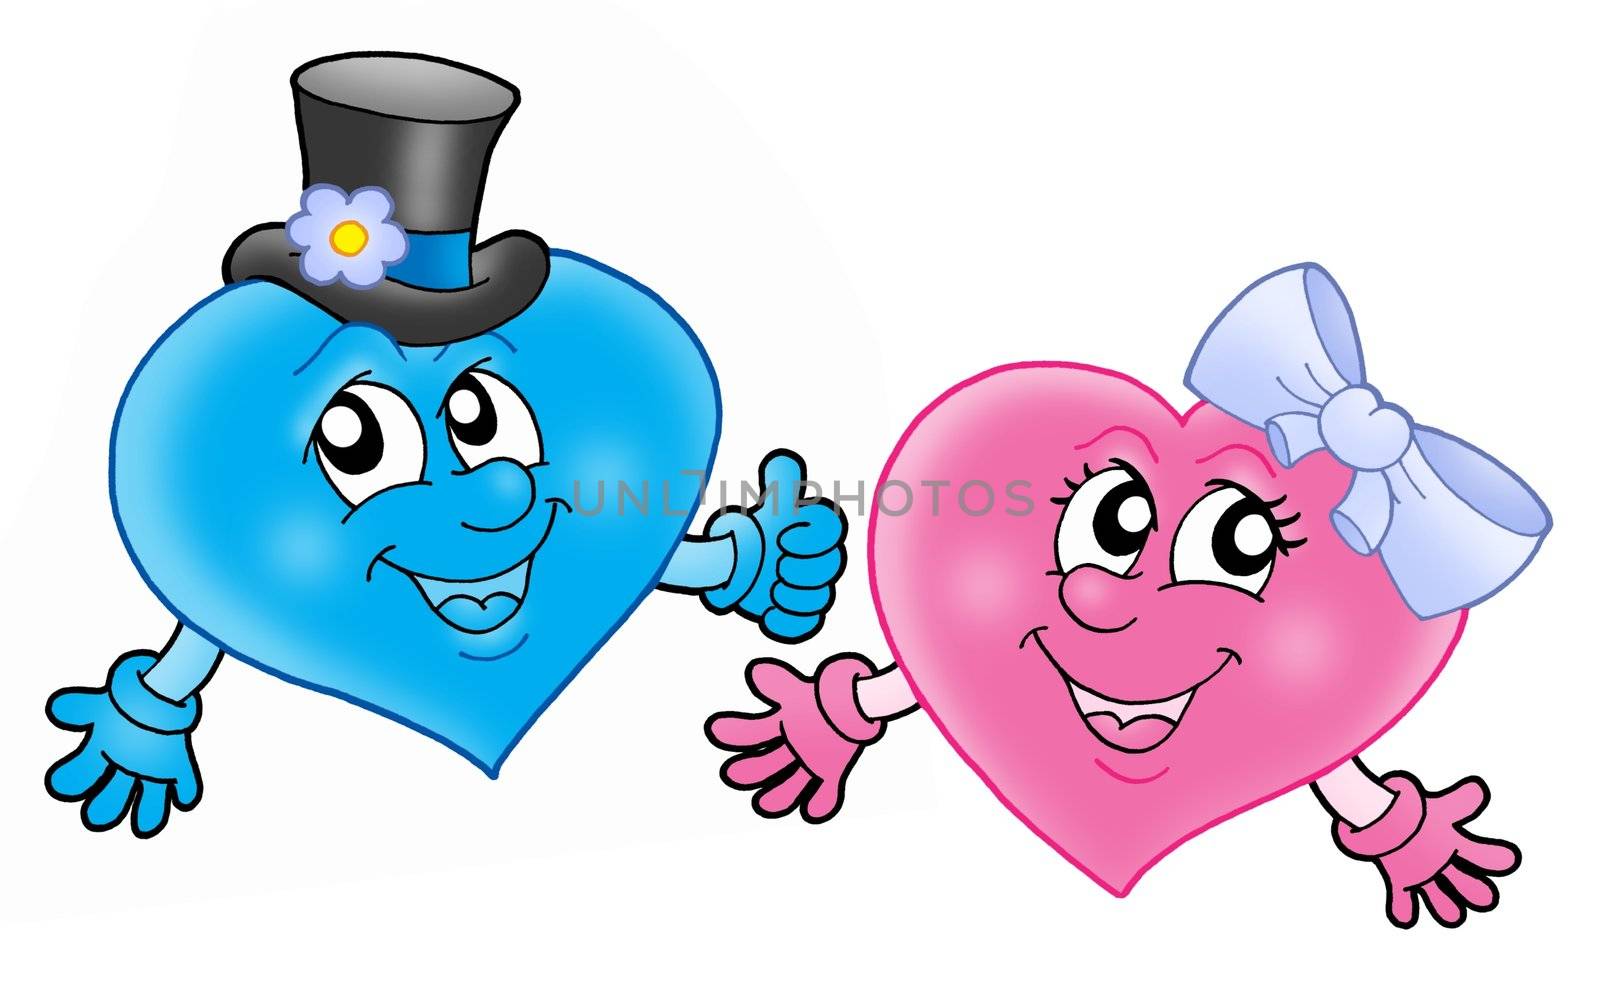 Pair of smiling hearts - color illustration.